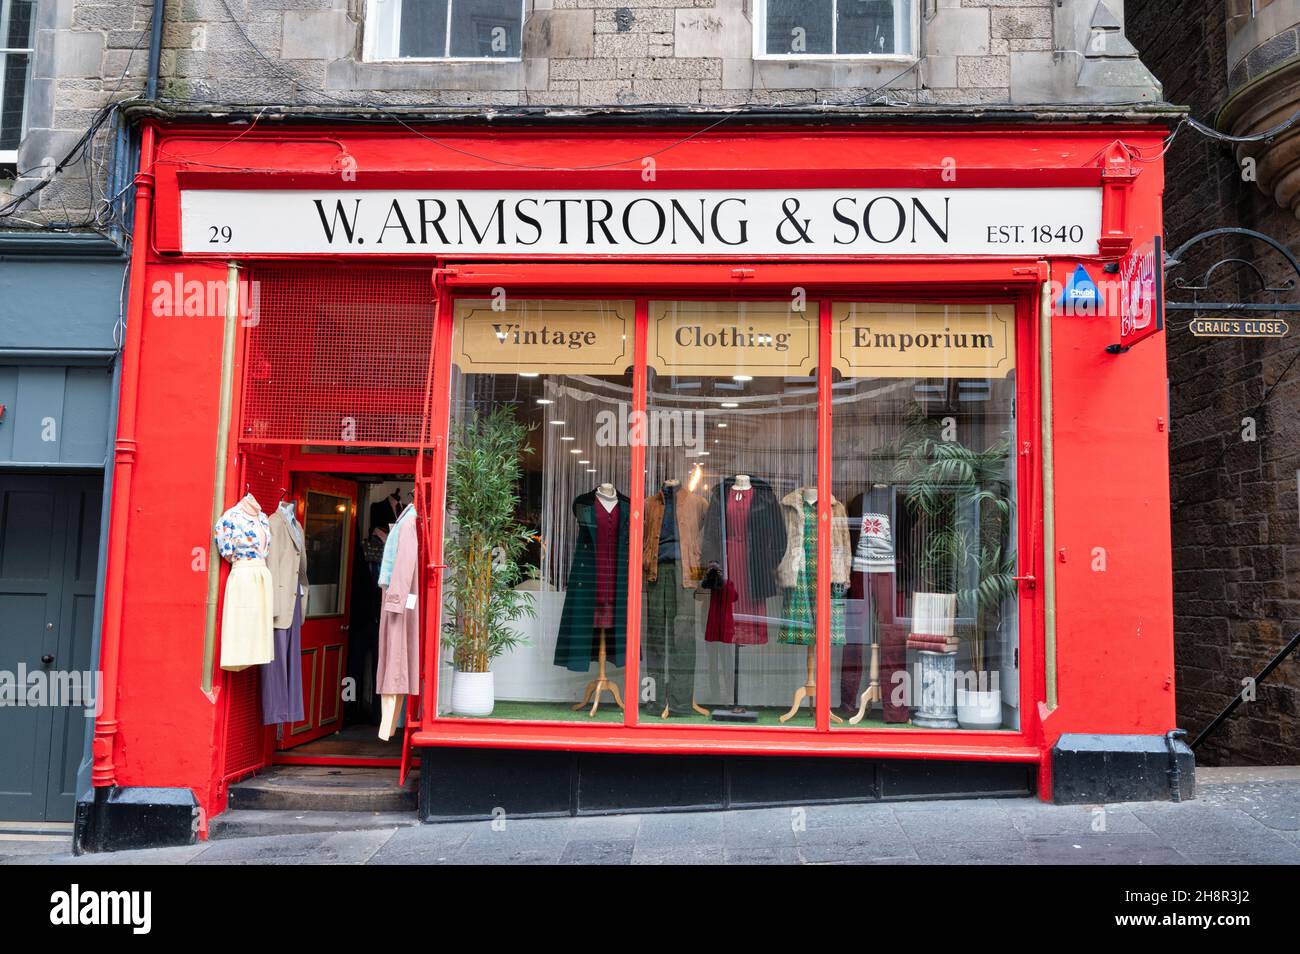 Edinburgh, Scotland- Nov 20, 2021:  The front of W Armstrong and Son vintage clothing store in Edinburgh. Stock Photo